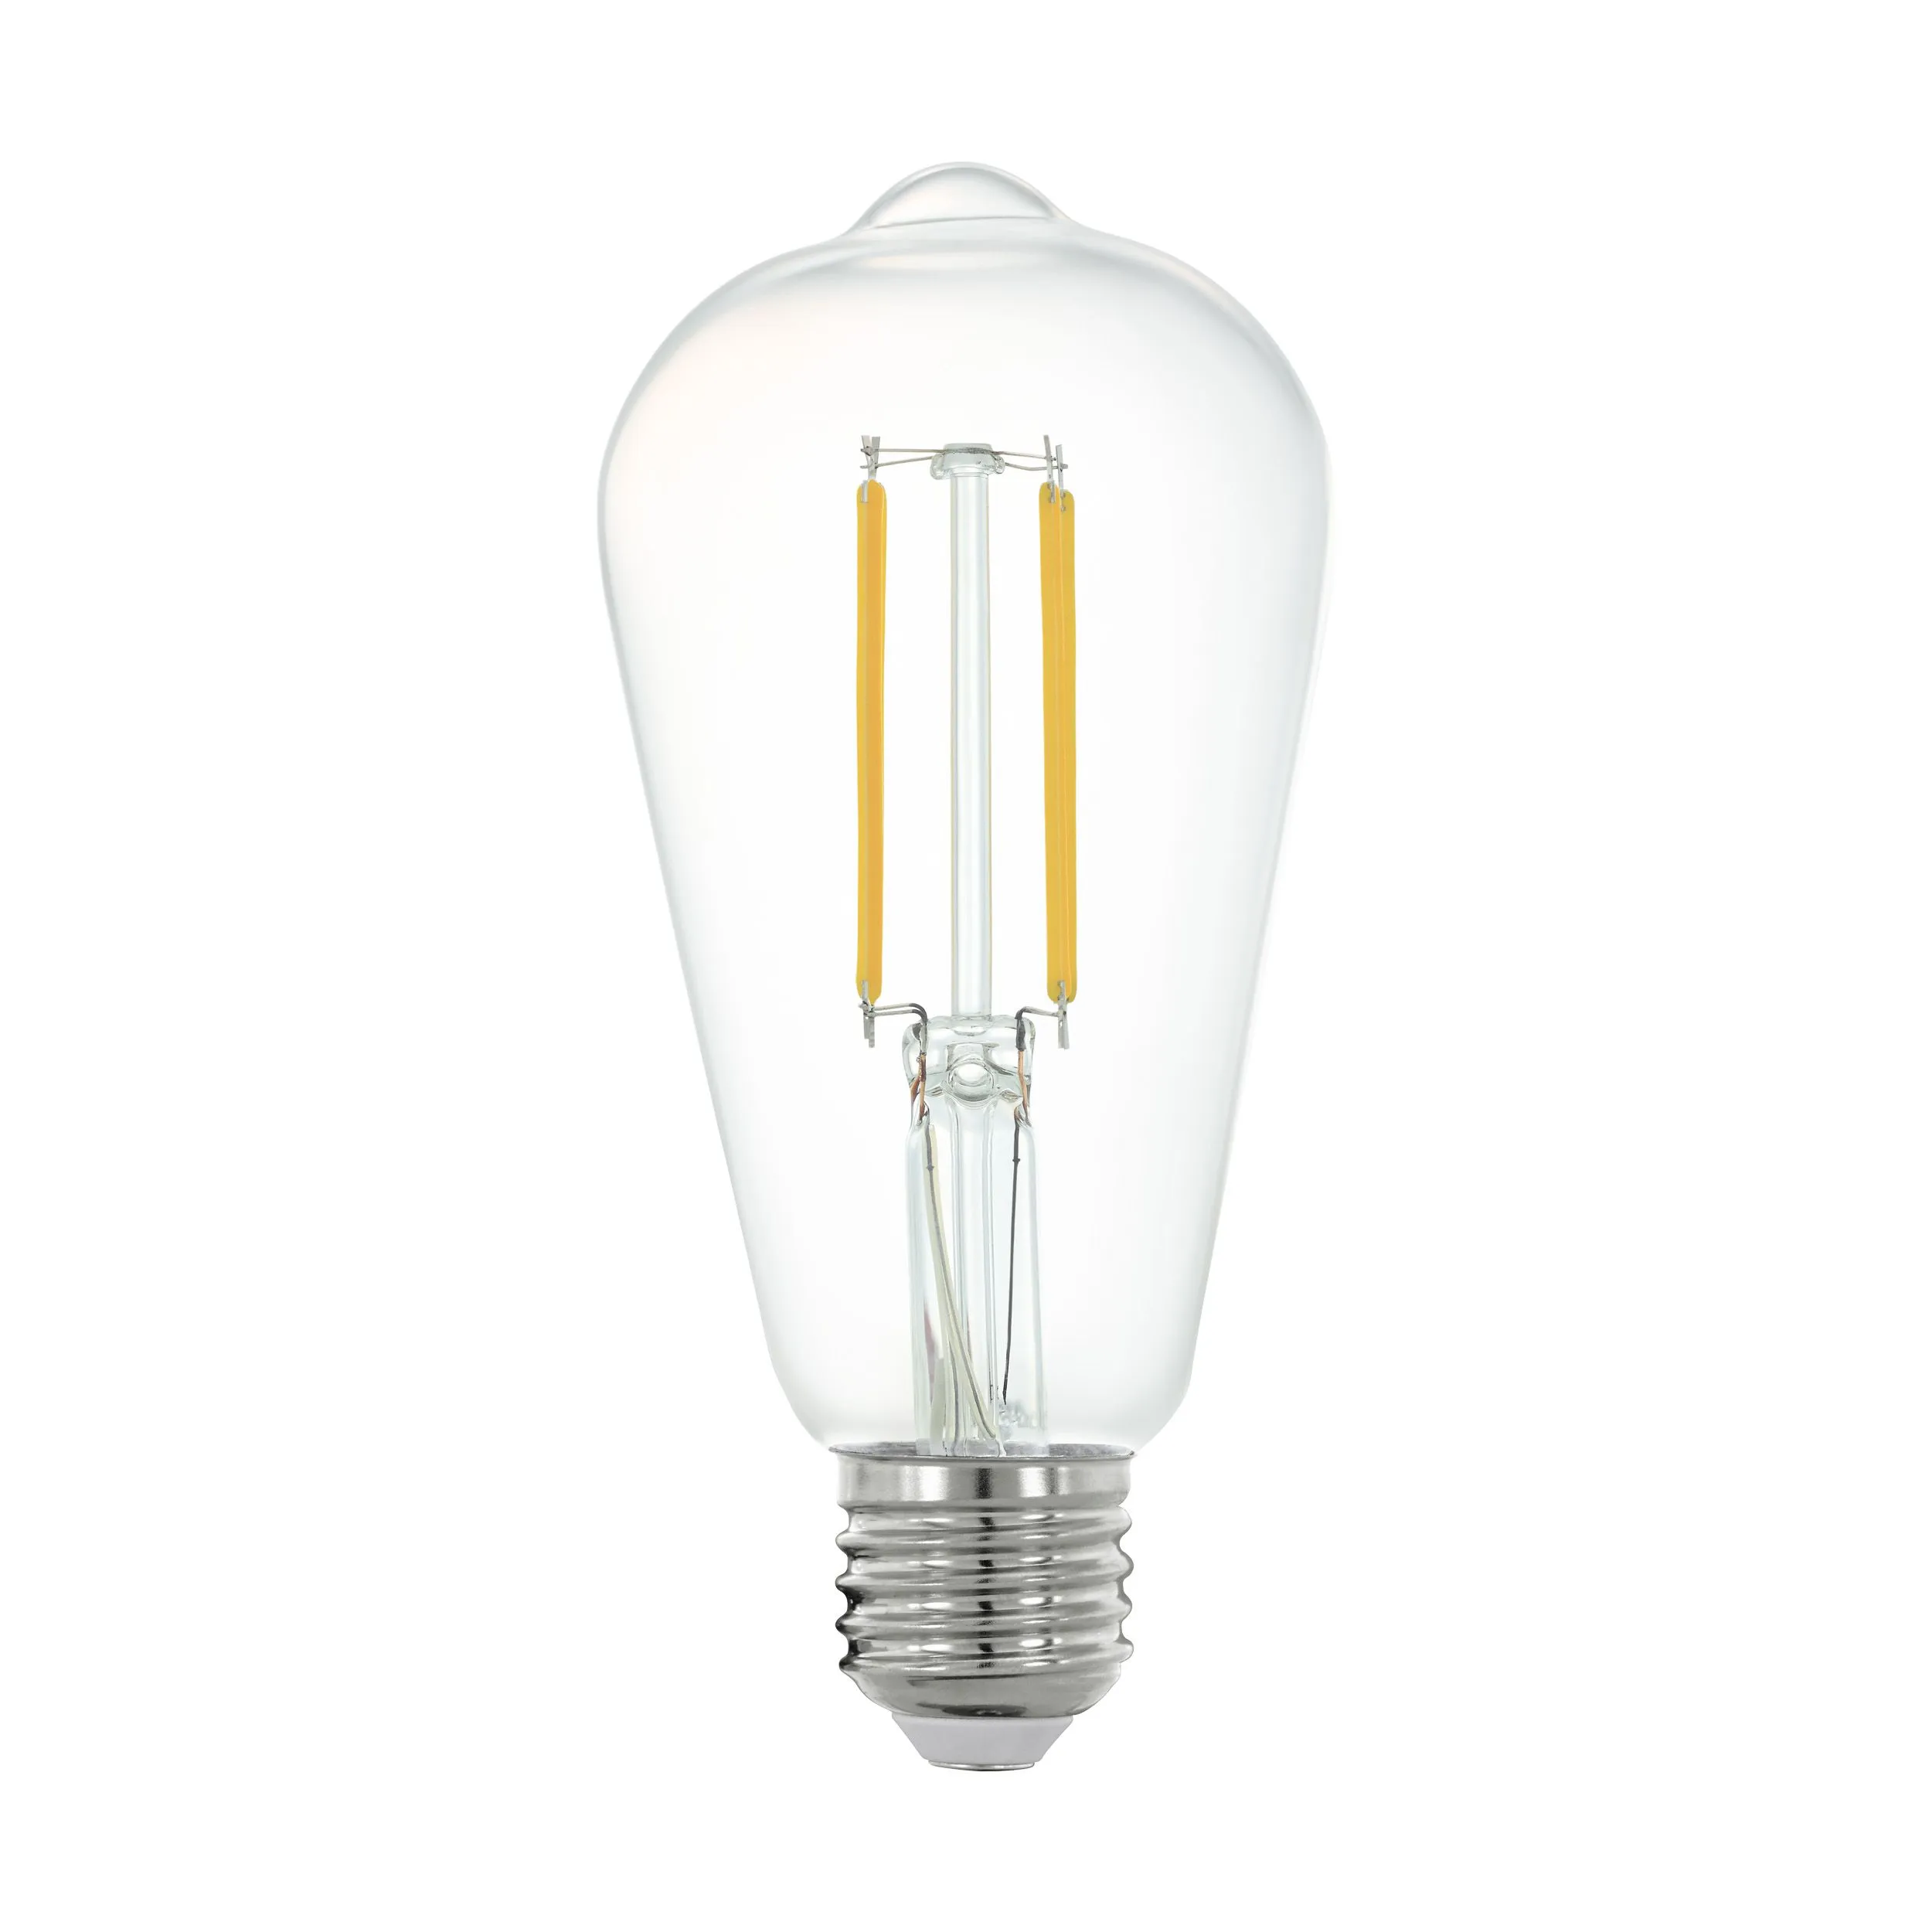 connect.z ST64 6W 2700k Dimmable E27 Filament Bulb